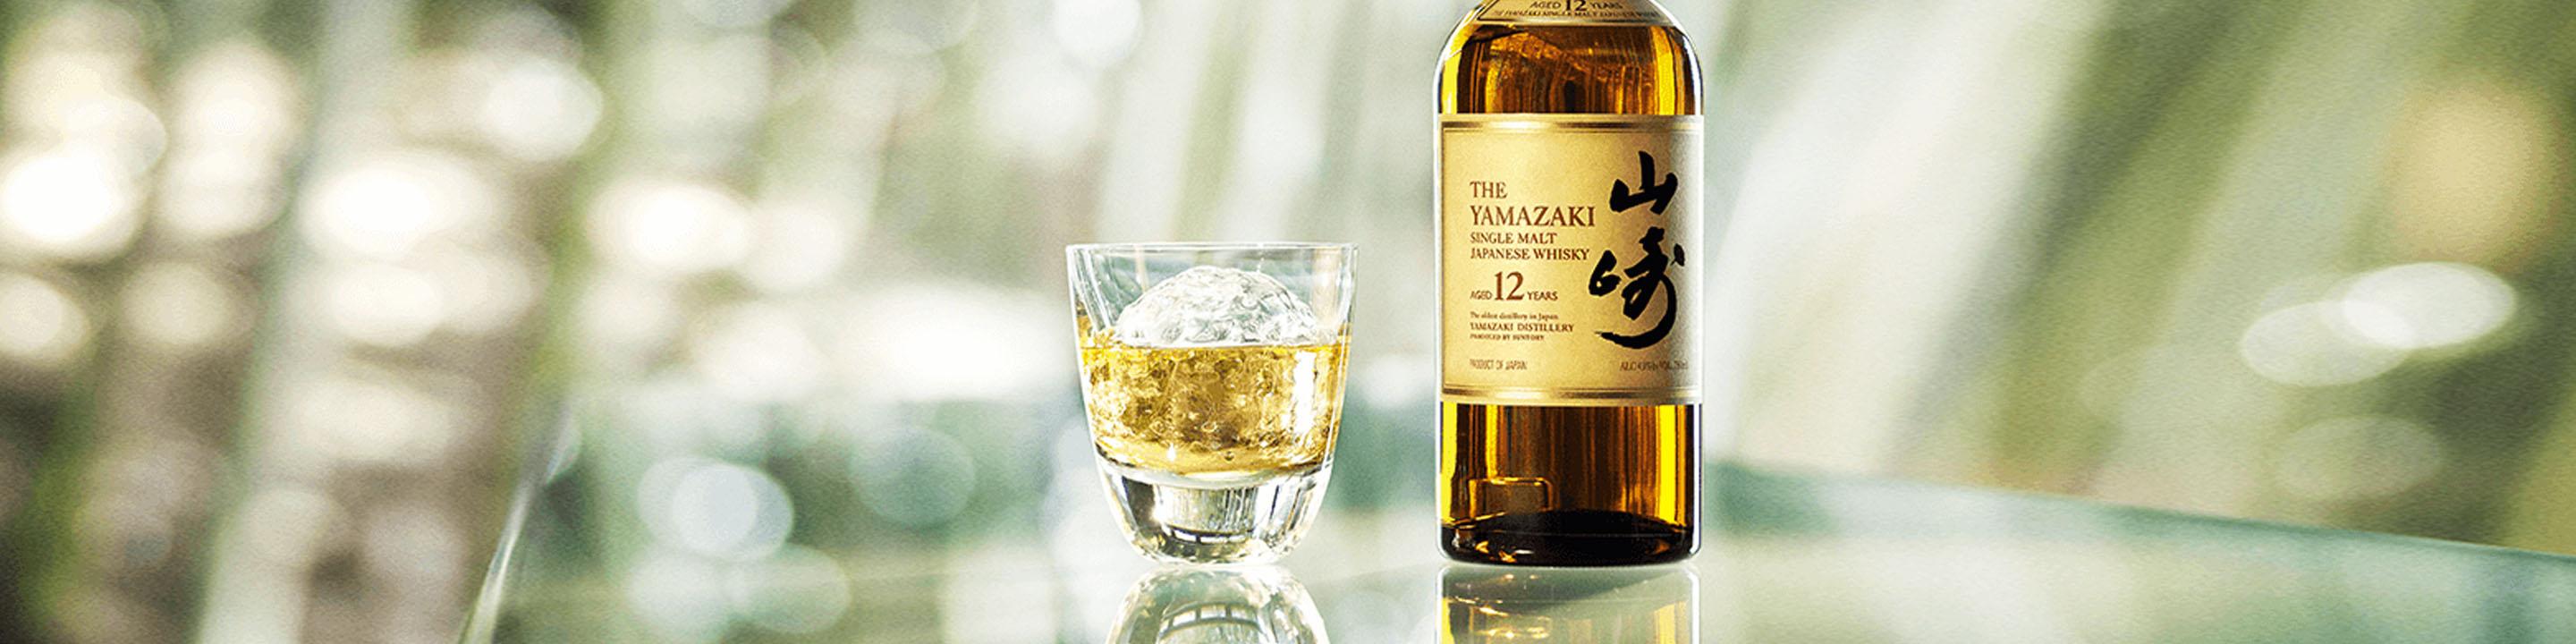 The Pioneer of Japanese whisky. Yamazaki® is Suntory’s flagship single malt, multi-layered with fruit and Mizunara aromas. Succulent with soft fruit. 

Buy Yamazaki online now from nearby liquor stores via Minibar Delivery.